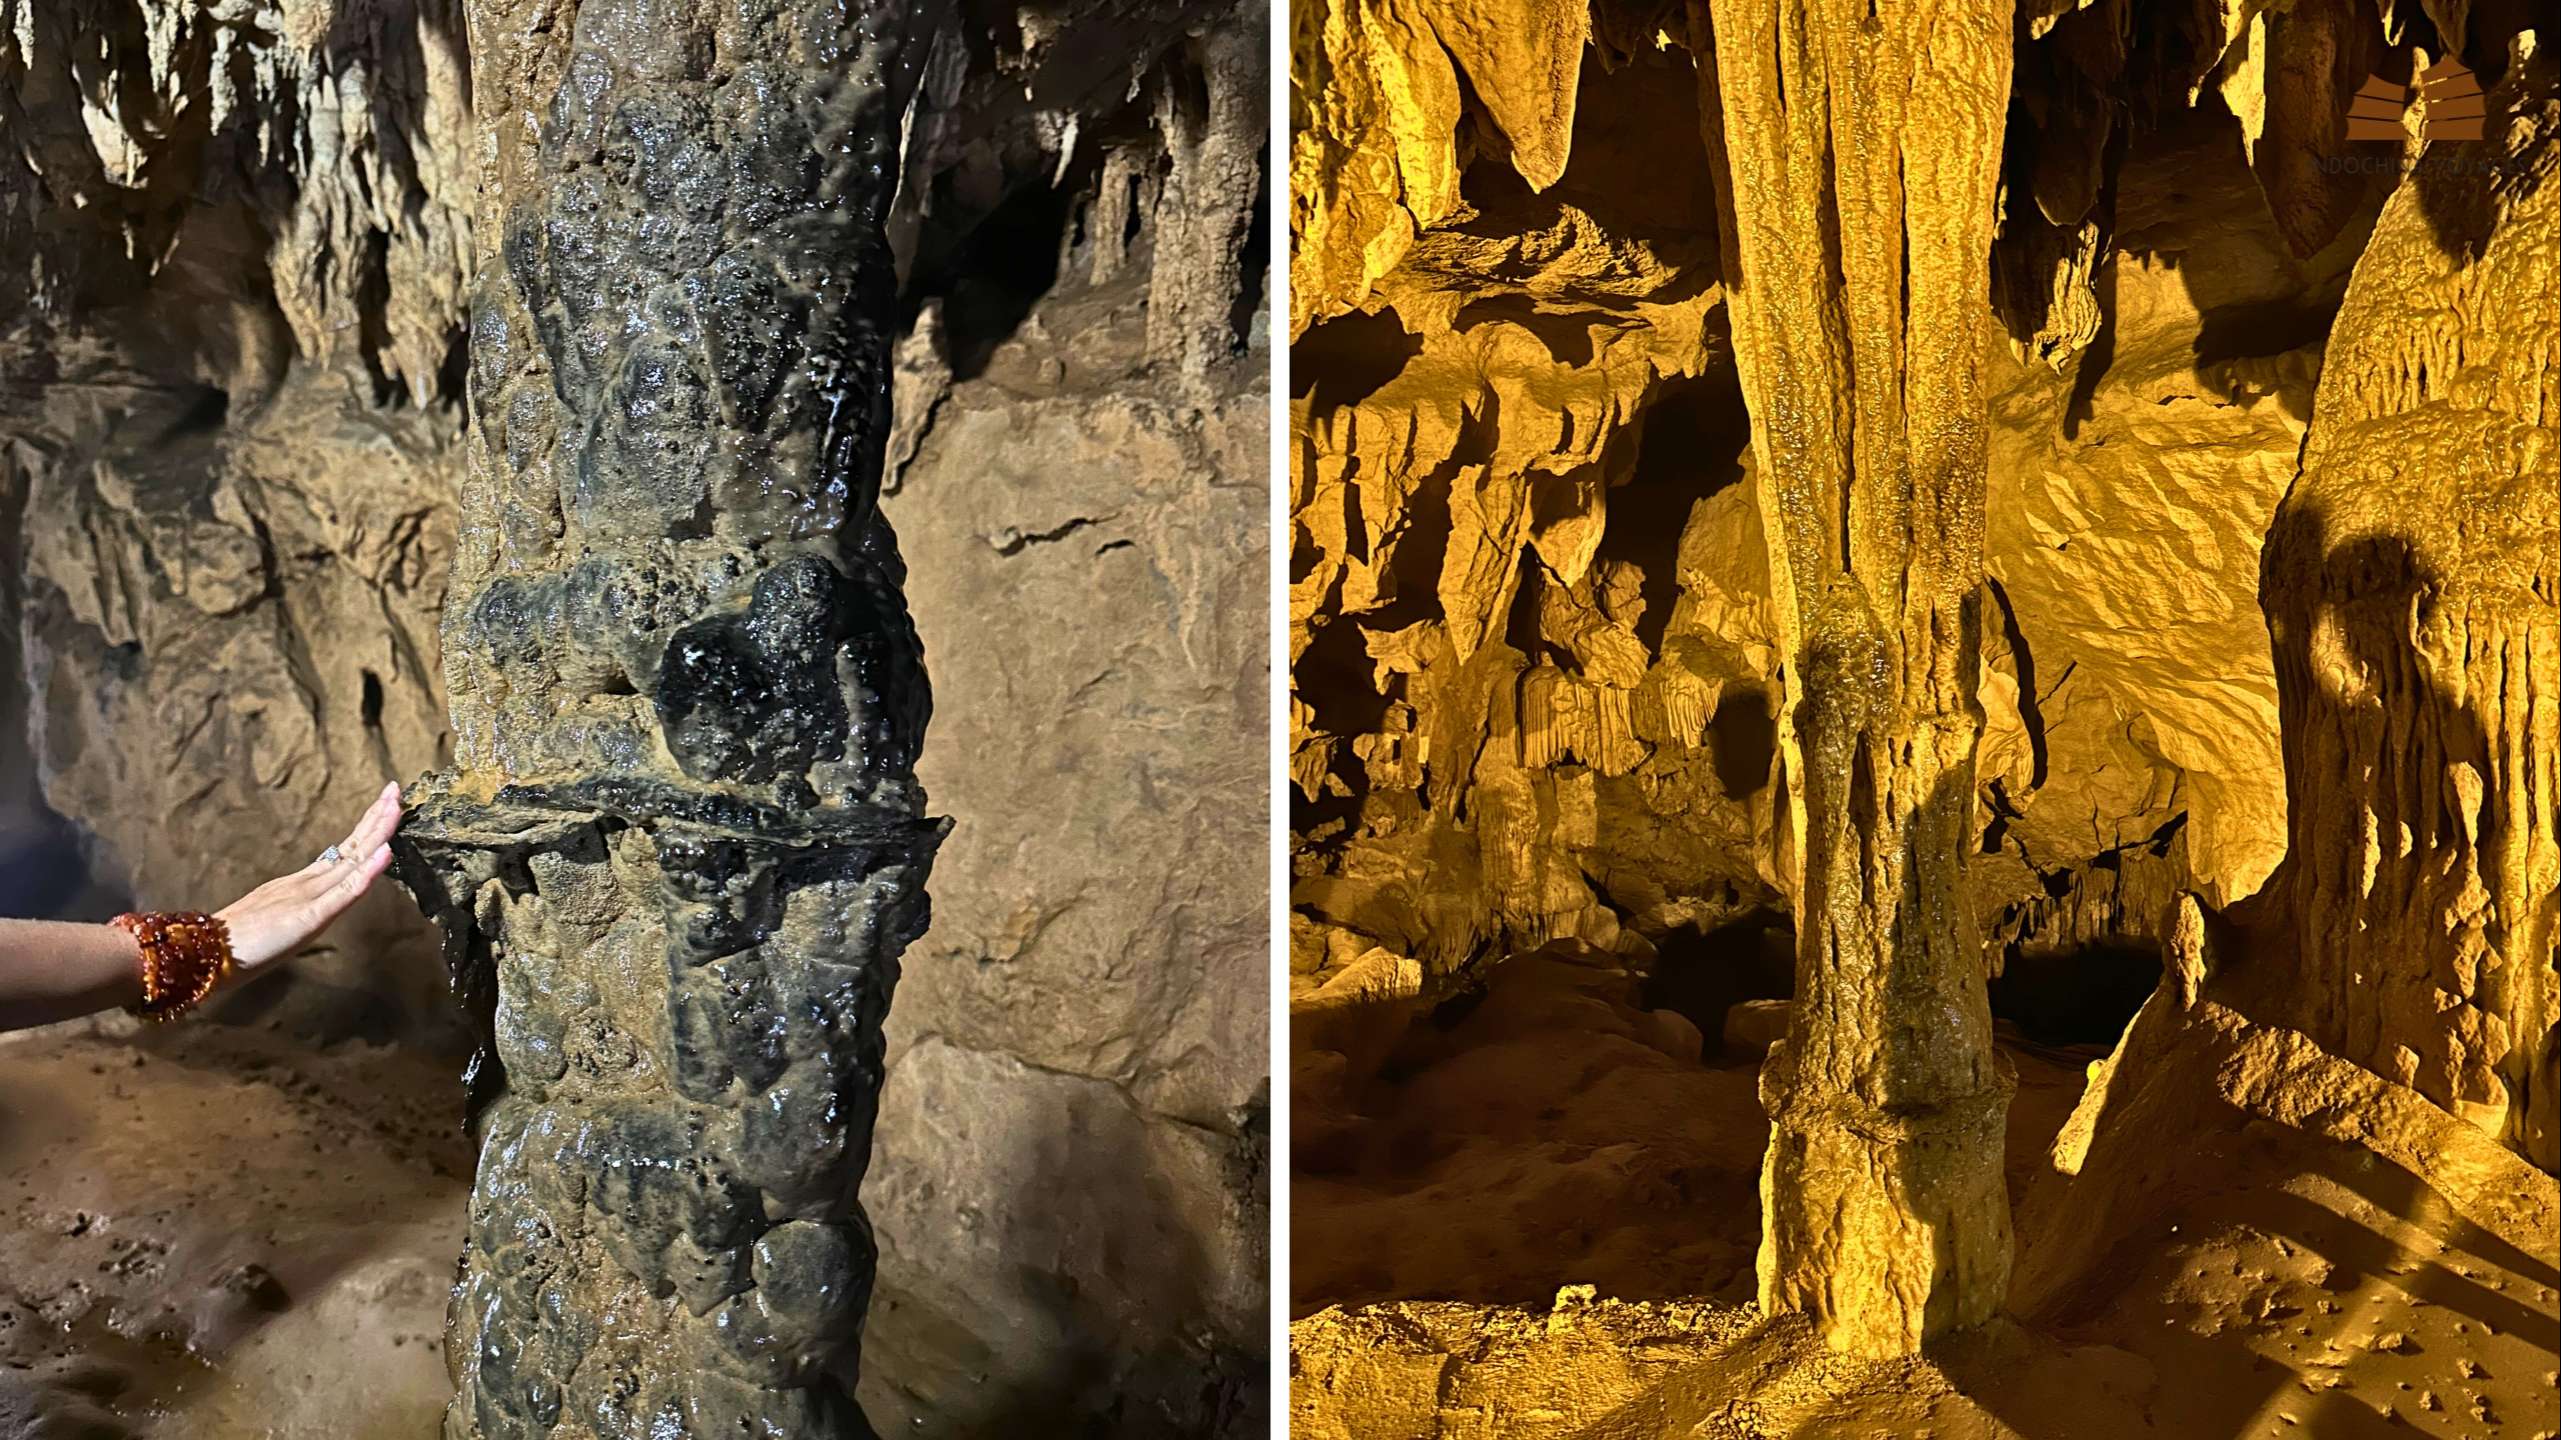 2 out of 3 sky pillars of the cave when visit the old route